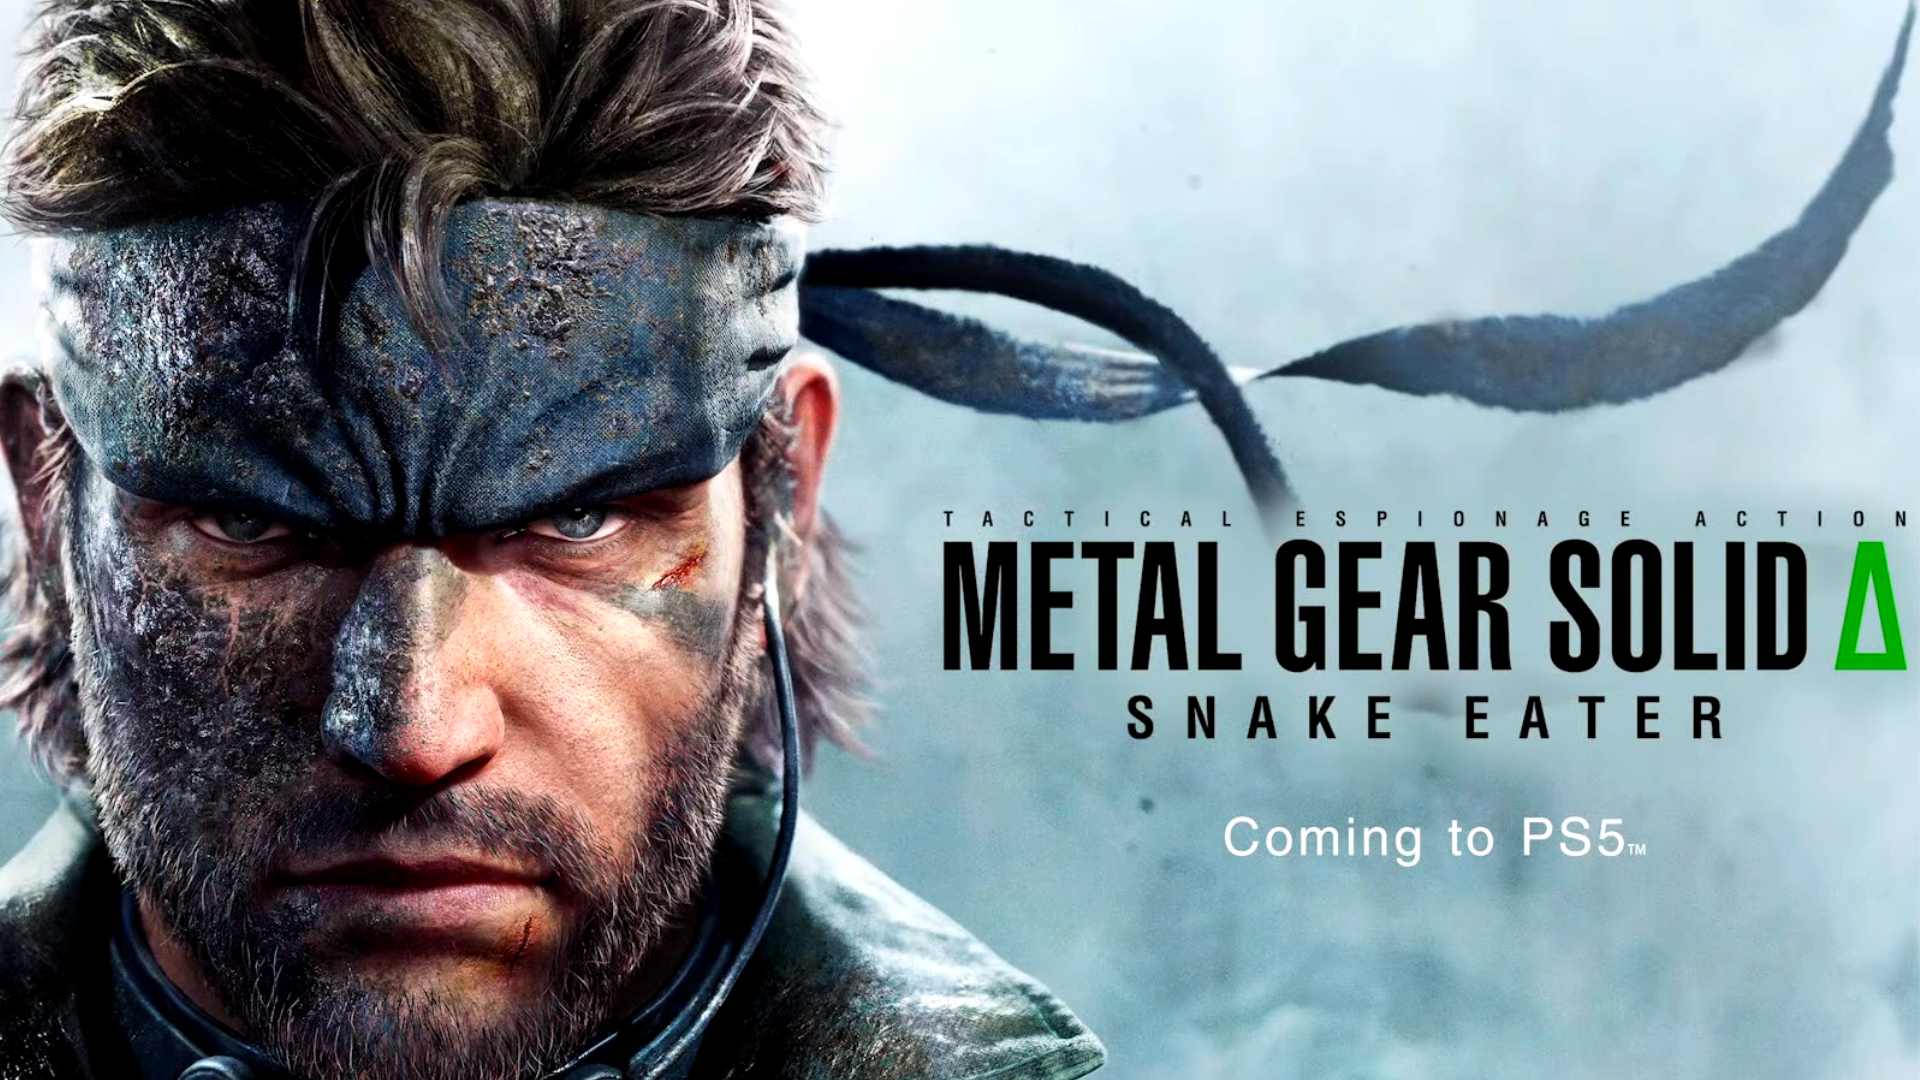 Metal Gear Solid 3: Snake Eater Remake was one of the highlights of the PlayStation Showcase